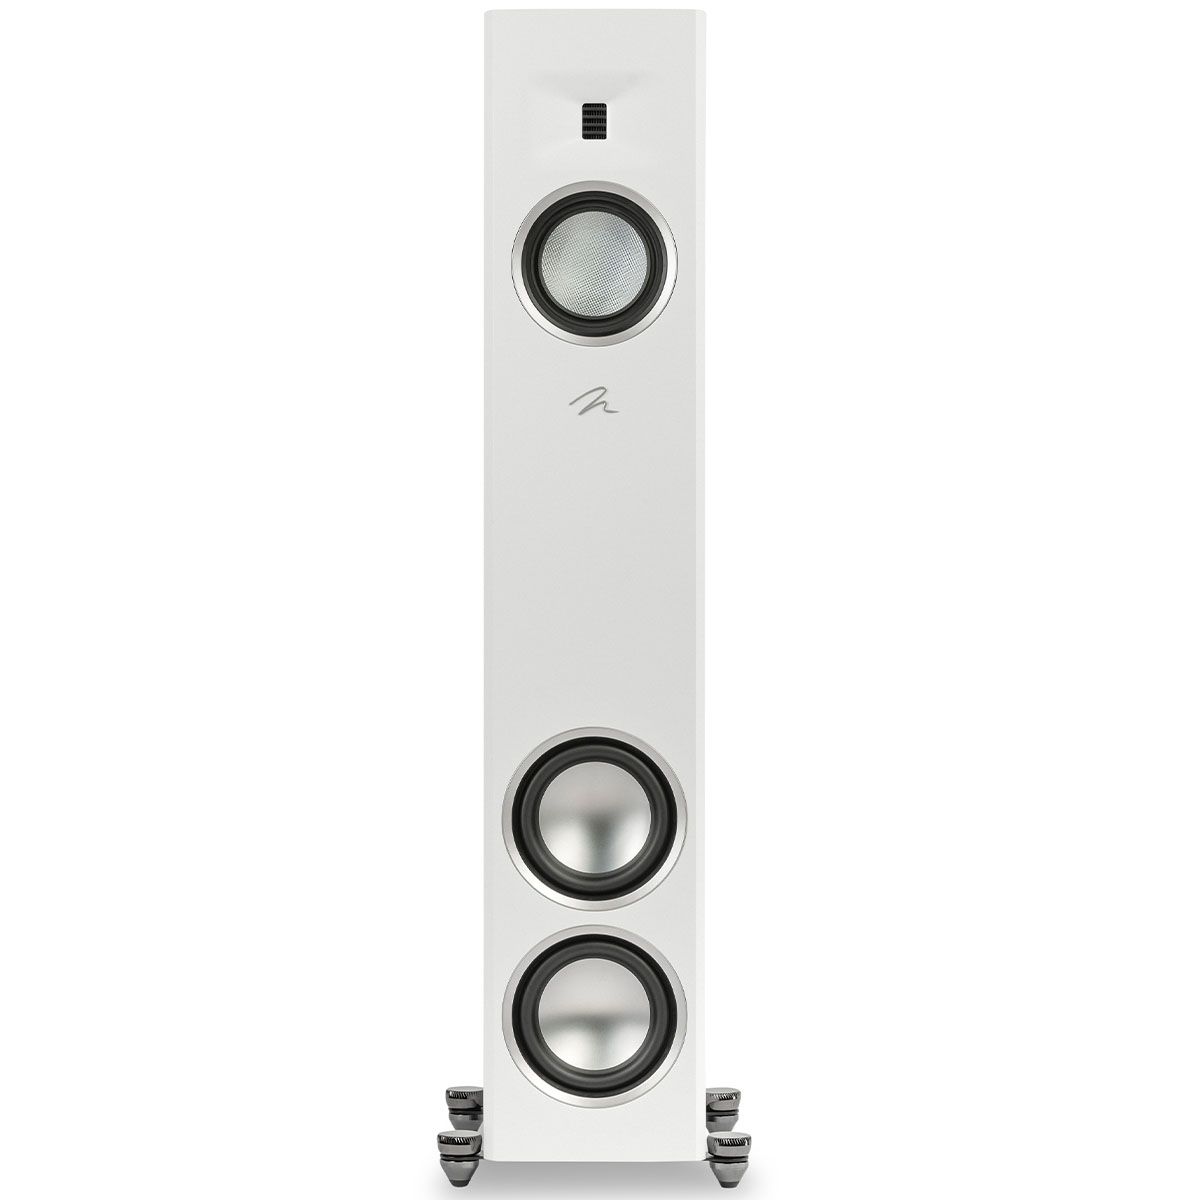 MartinLogan Motion XT F20 Floorstanding Speaker in white, front view without grilles on white background